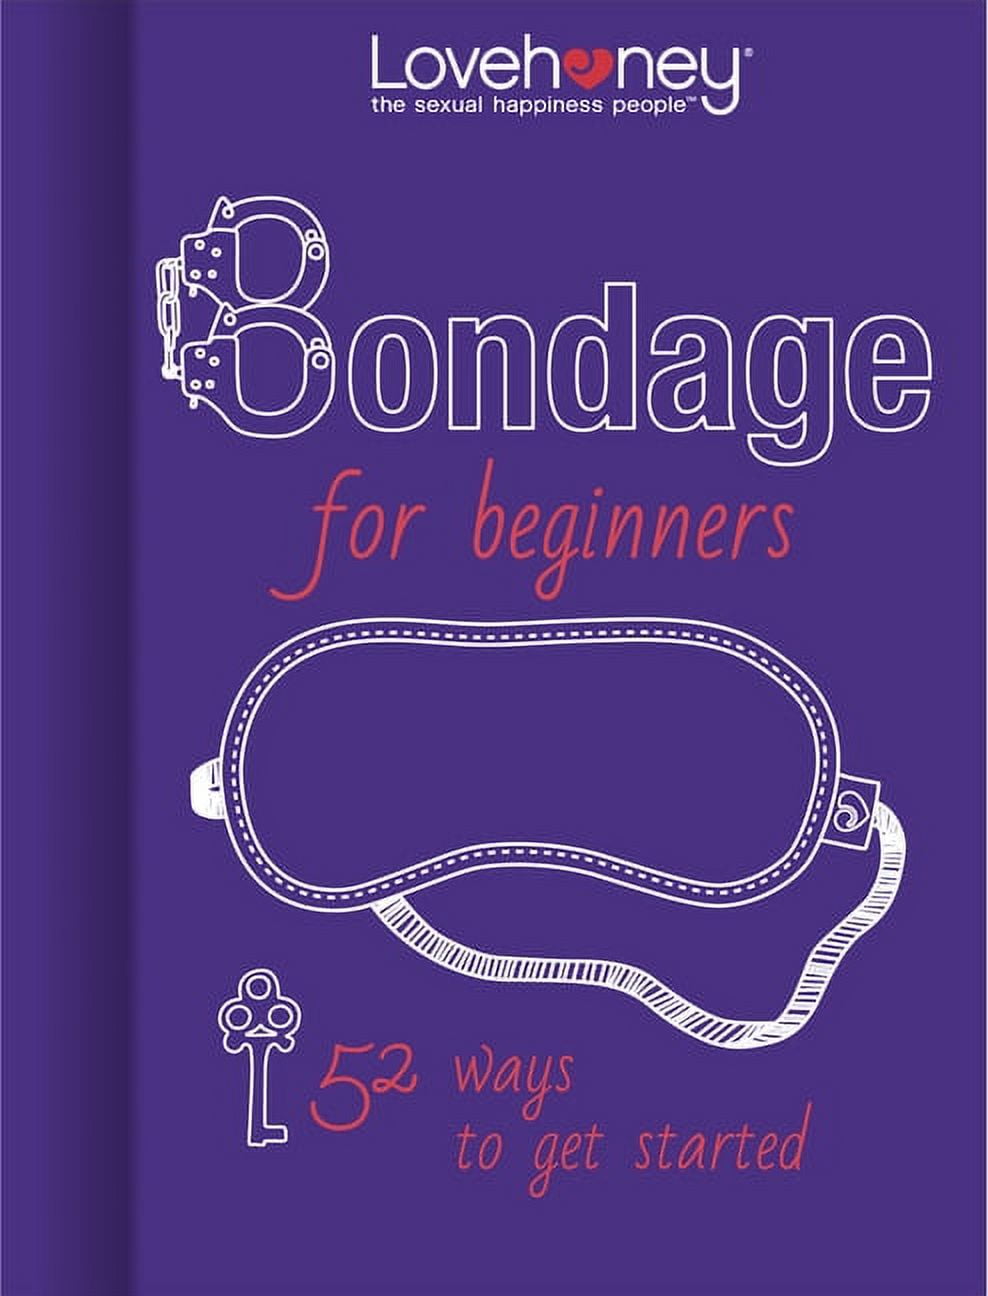 Lovehoney Gift Books Bondage for Beginners 52 Ways to Get Started (Hardcover) pic